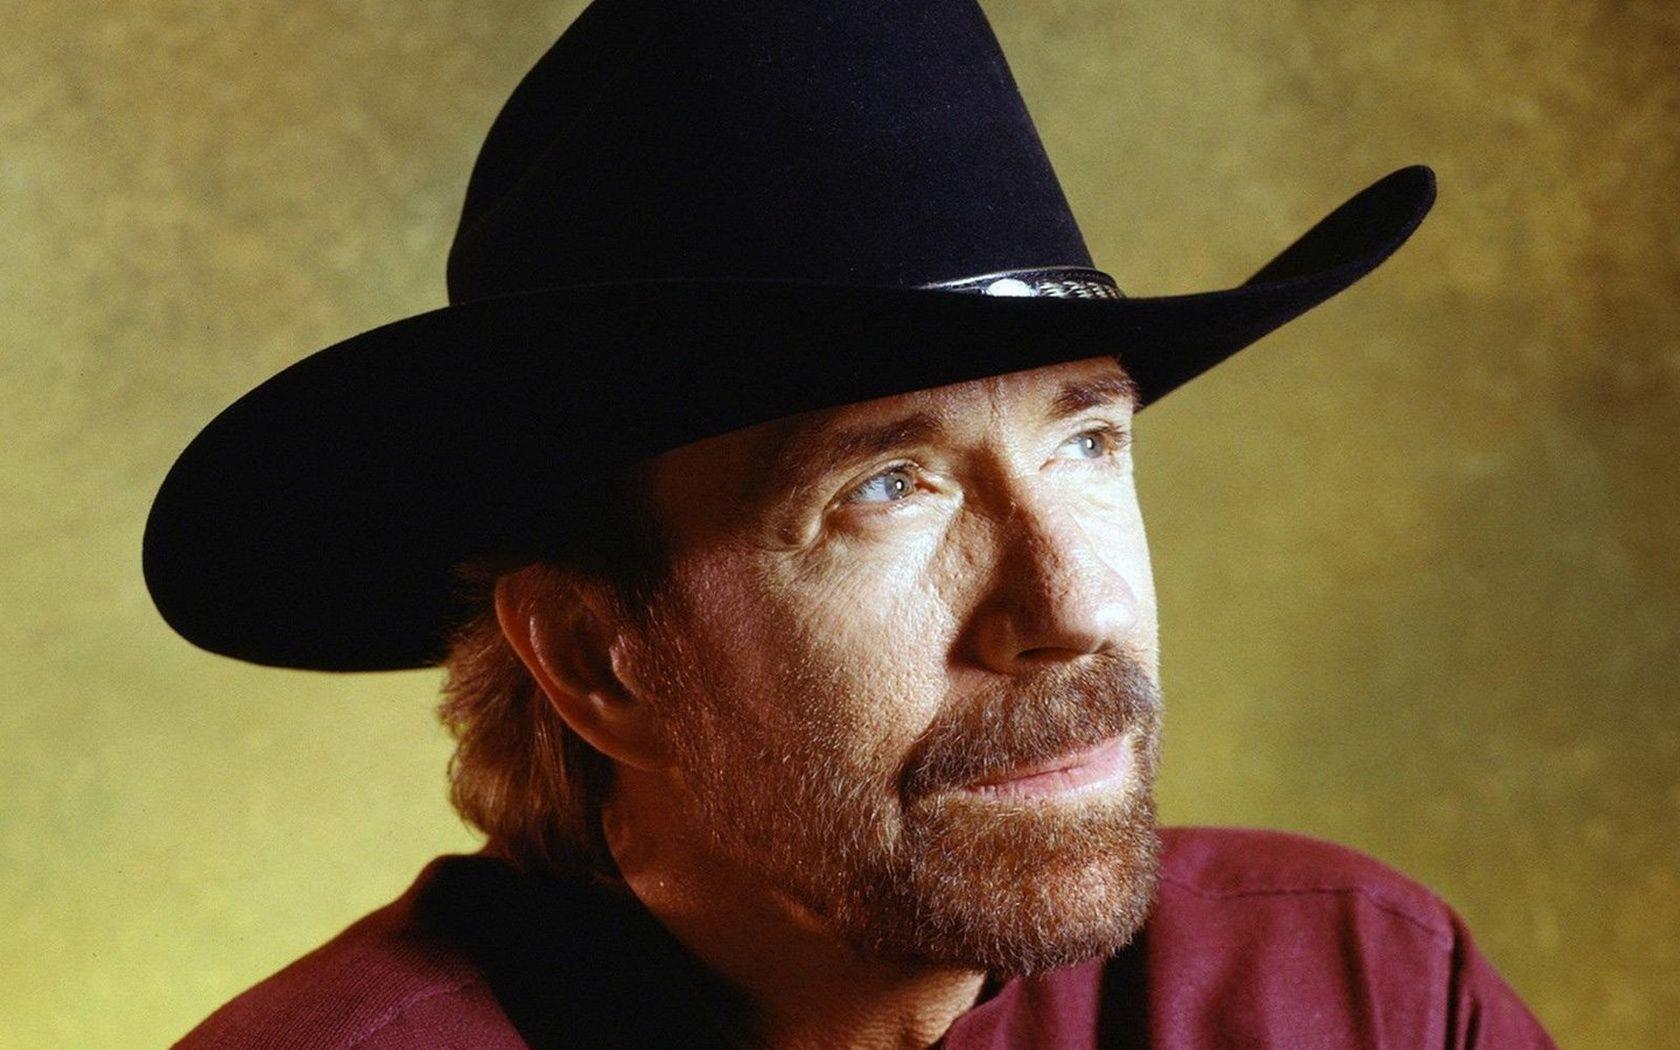 Chuck Norris wallpaper and image, picture, photo